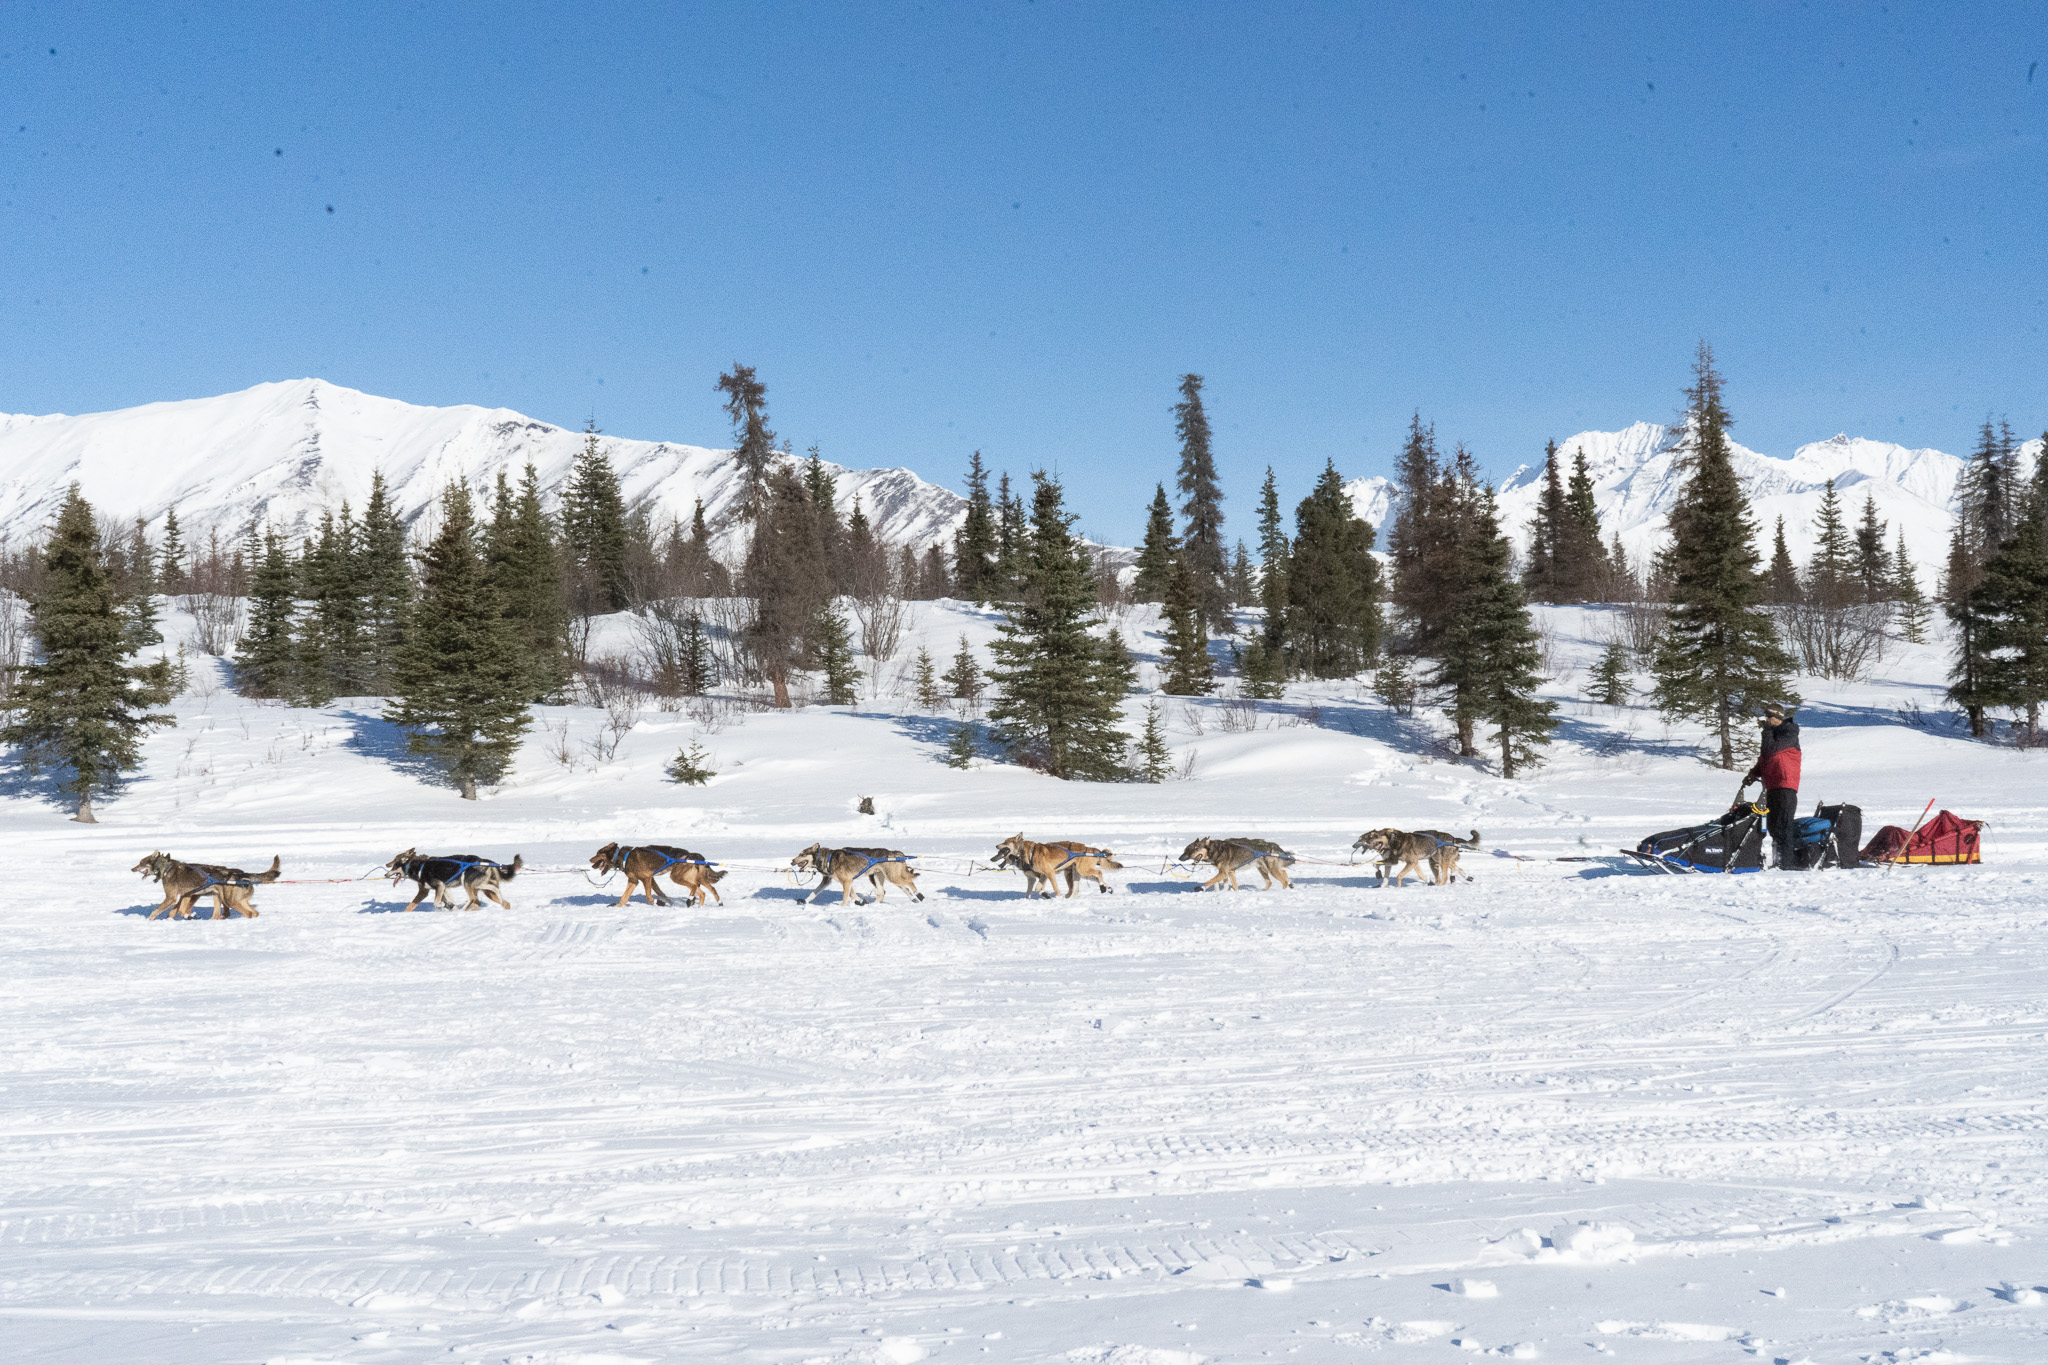 A musher rides in front of mountains and trees